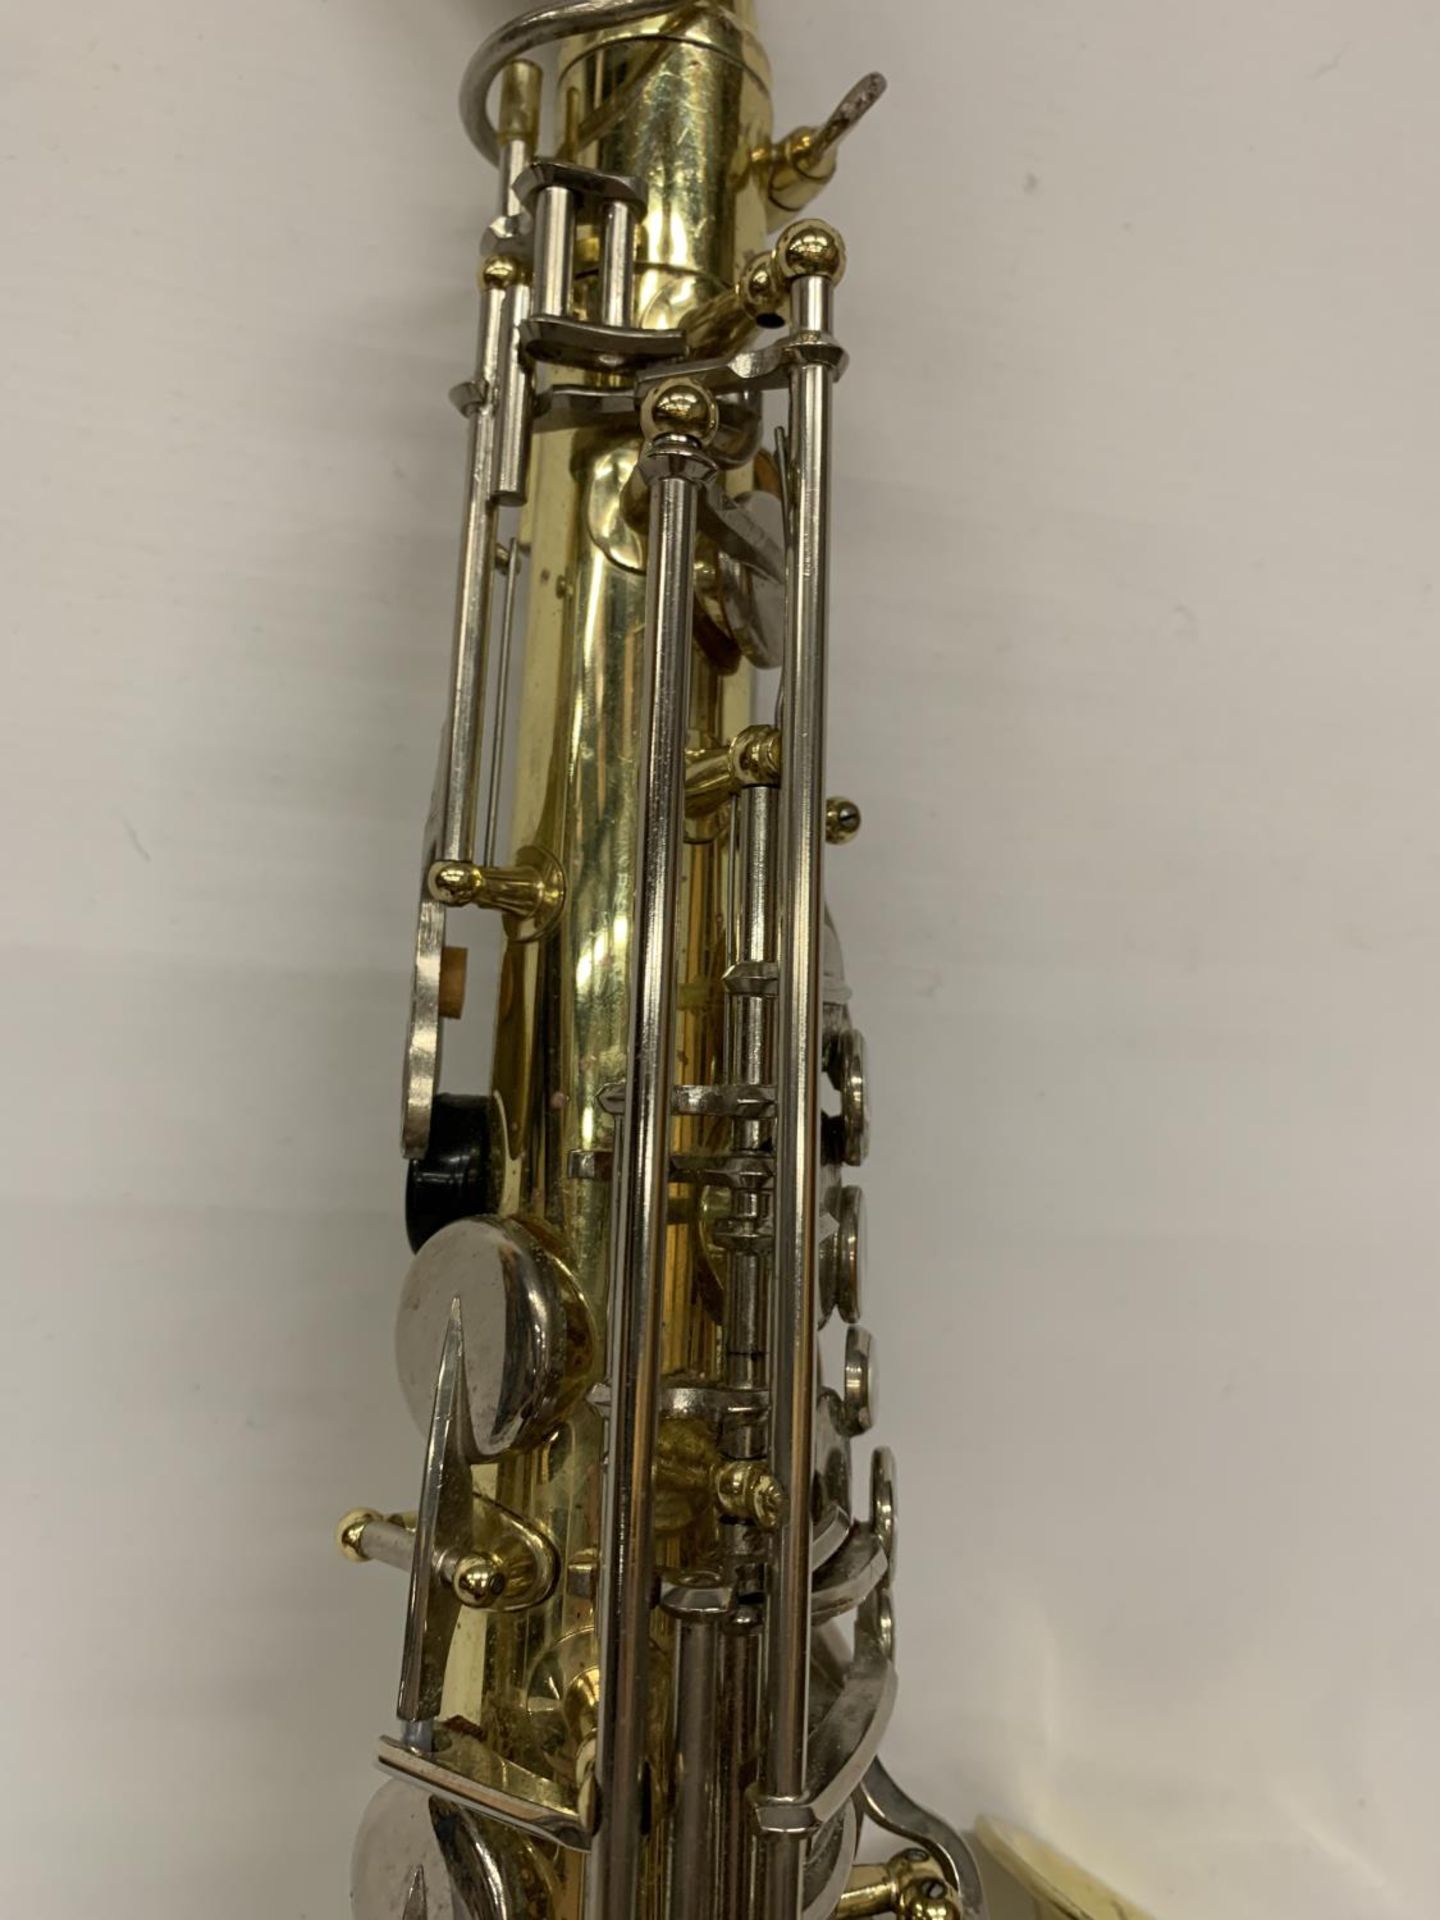 A YAMAHA SAXOPHONE WITH CASE AND A TEACHING BOOK - Image 10 of 24